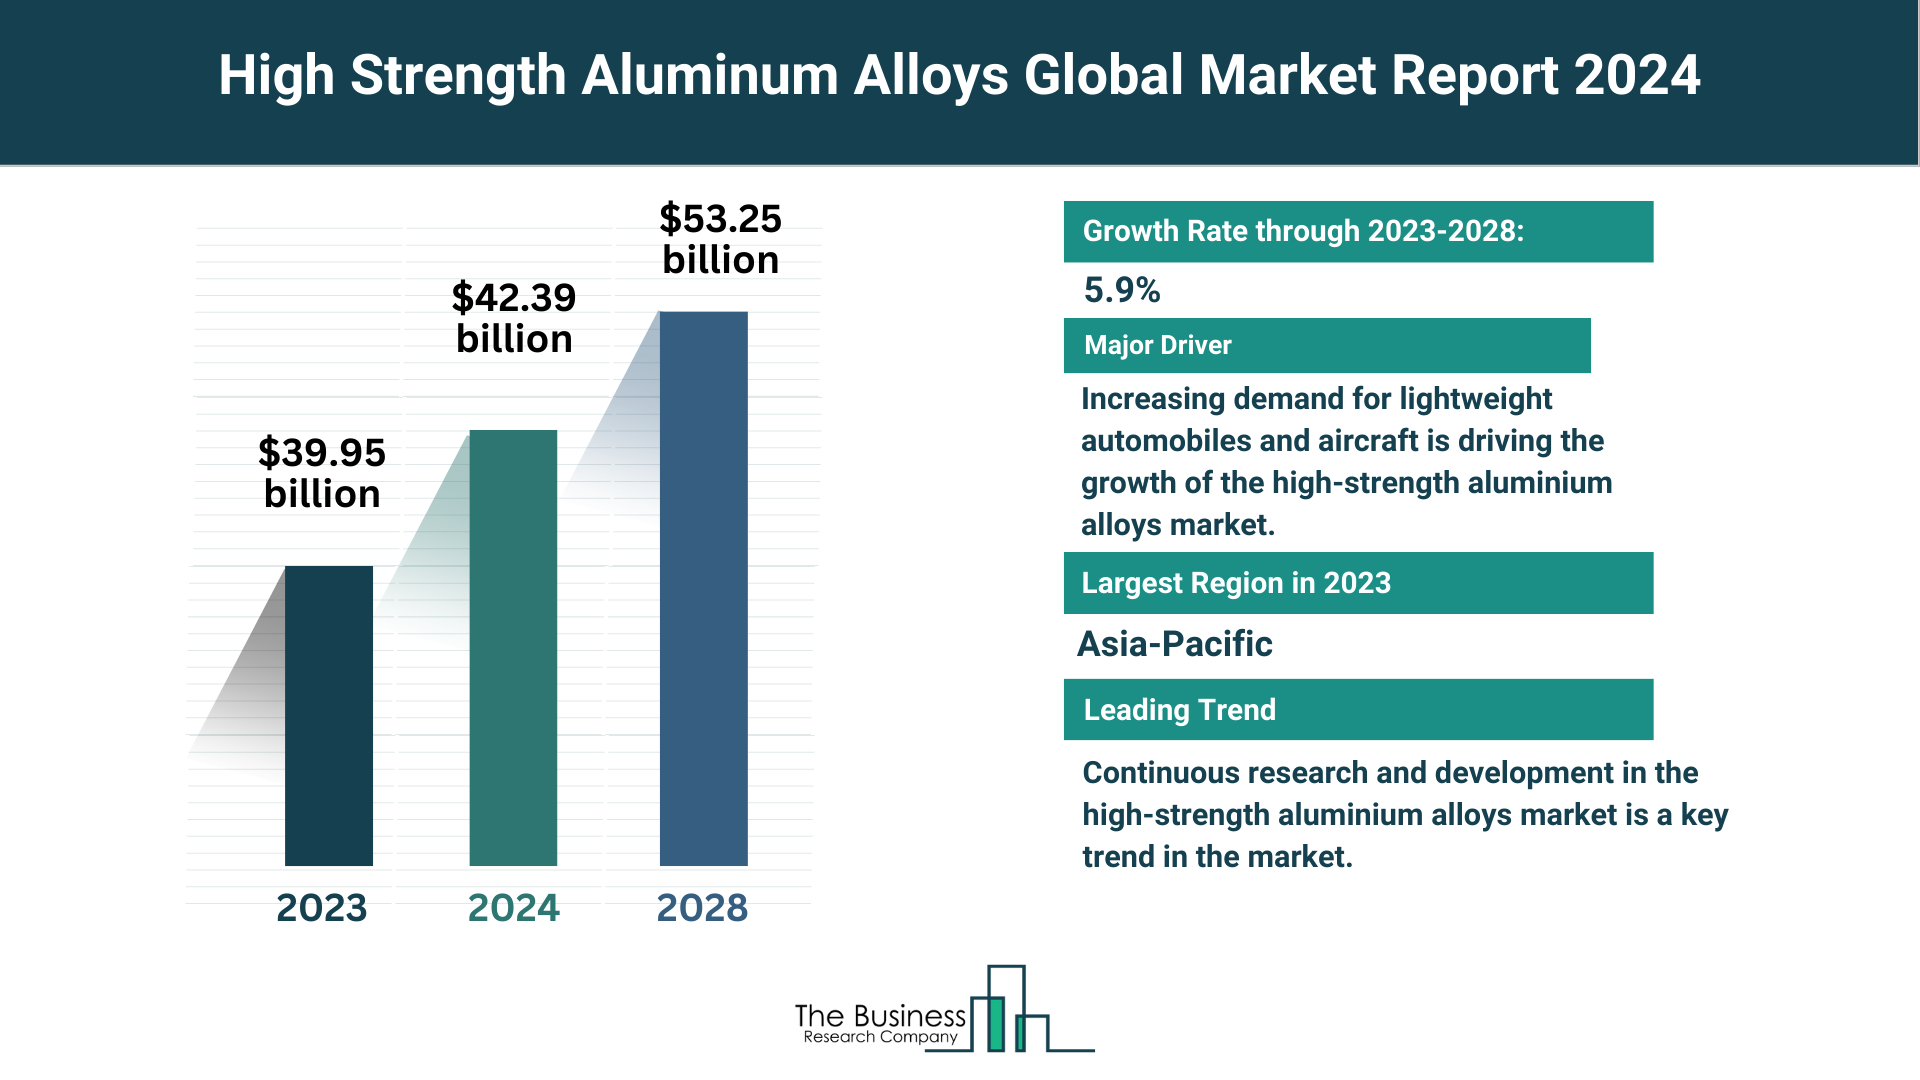 What Are The 5 Takeaways From The High Strength Aluminum Alloys Market Overview 2024